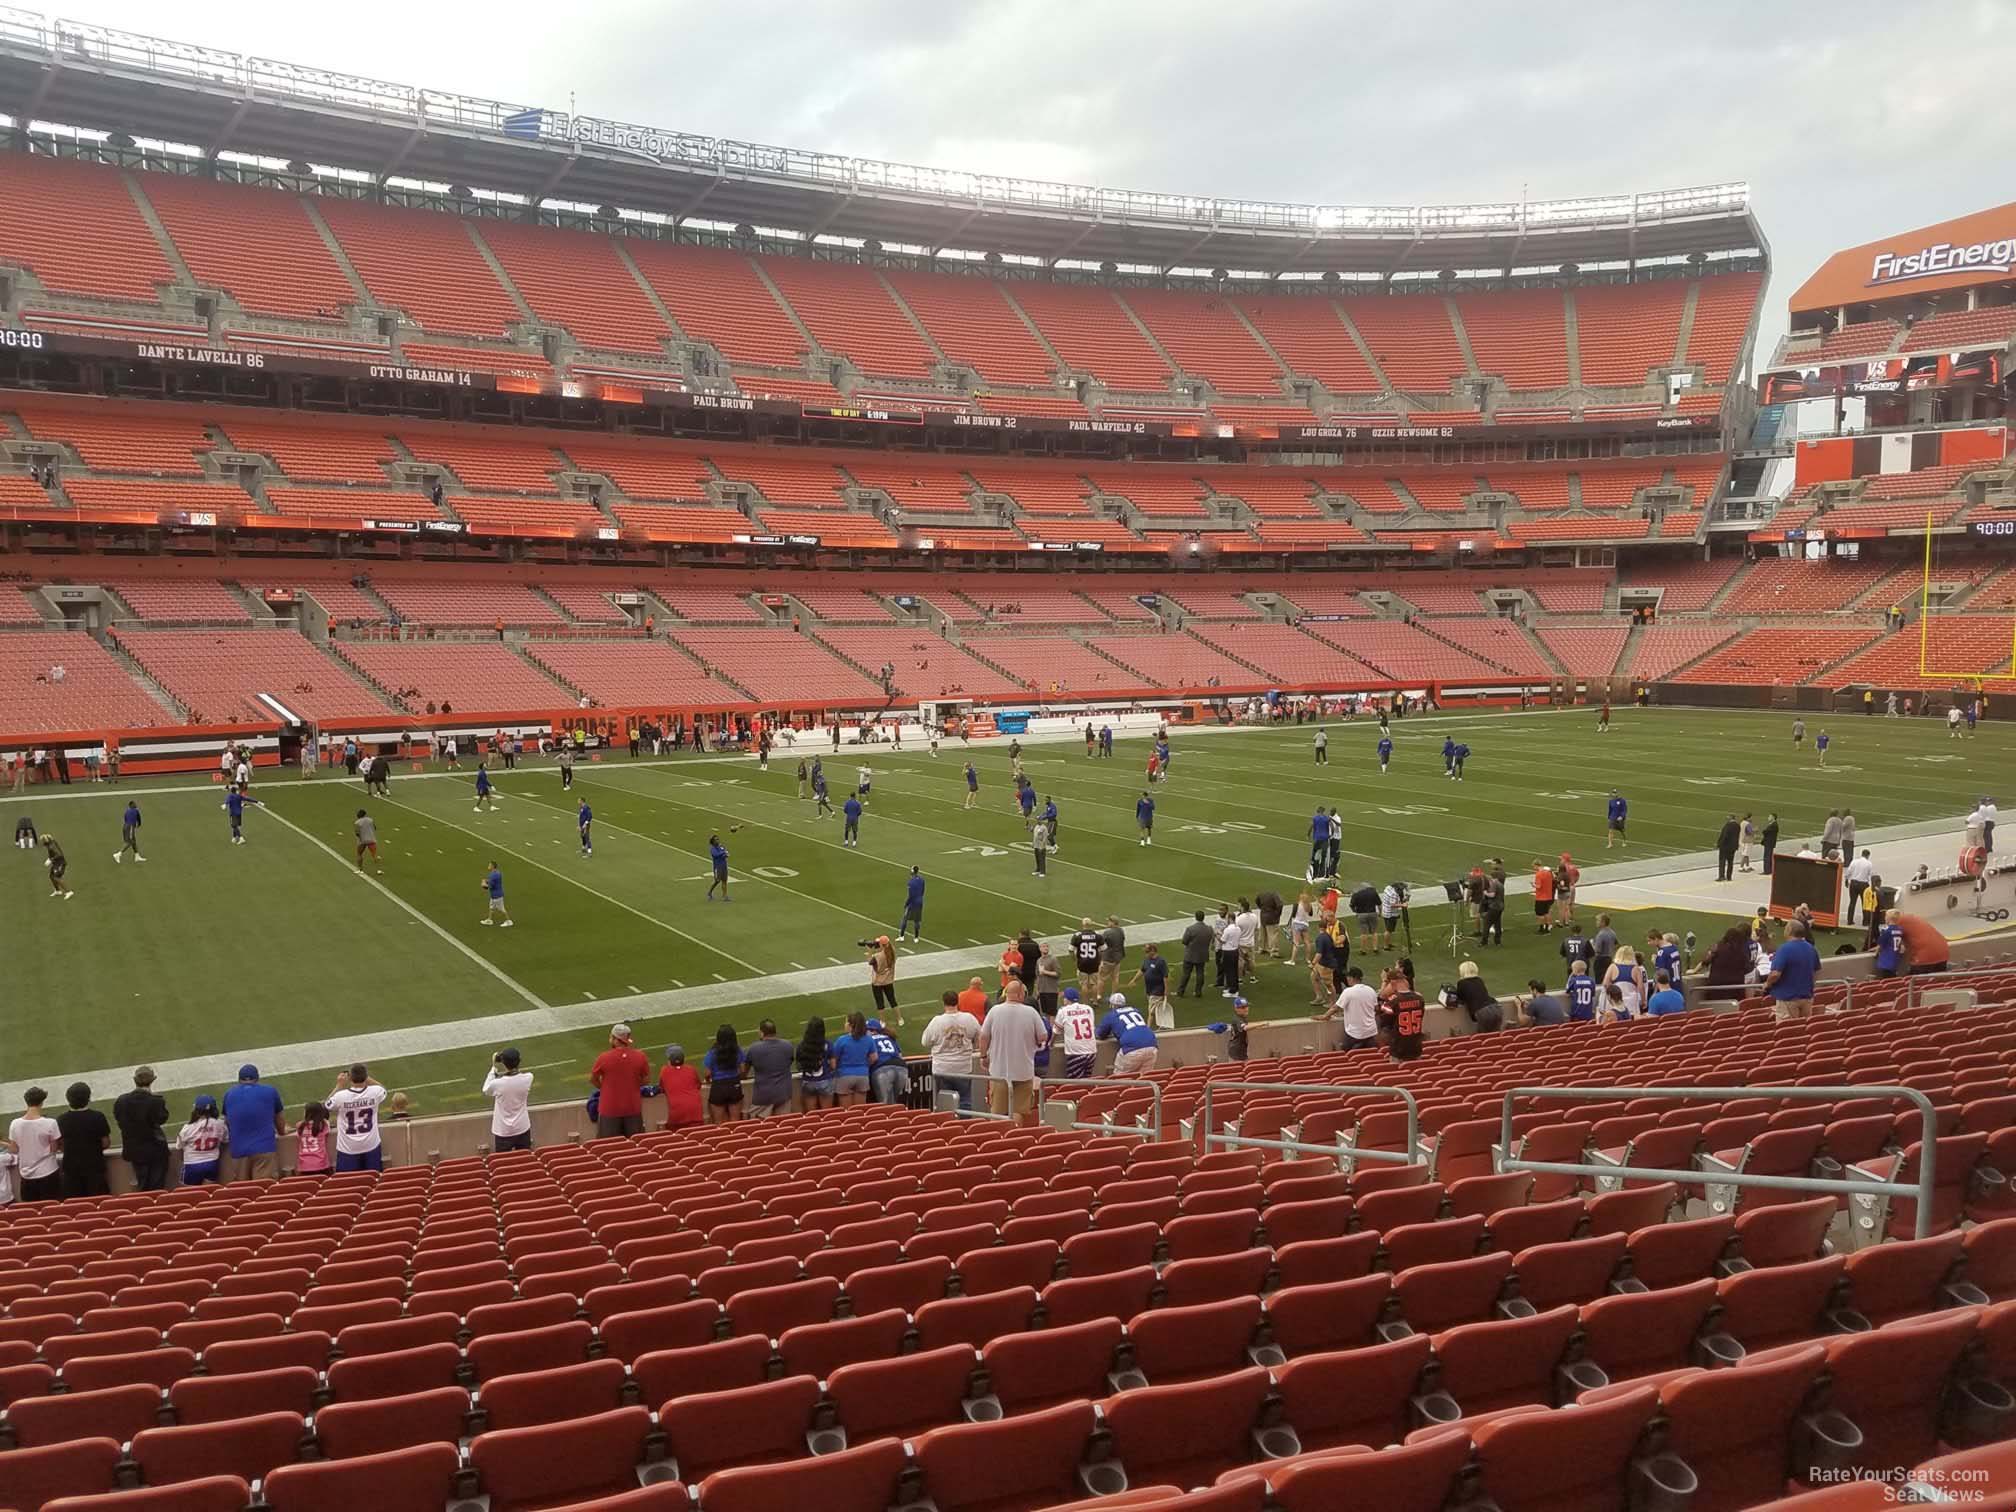 section 104, row 22 seat view  - cleveland browns stadium